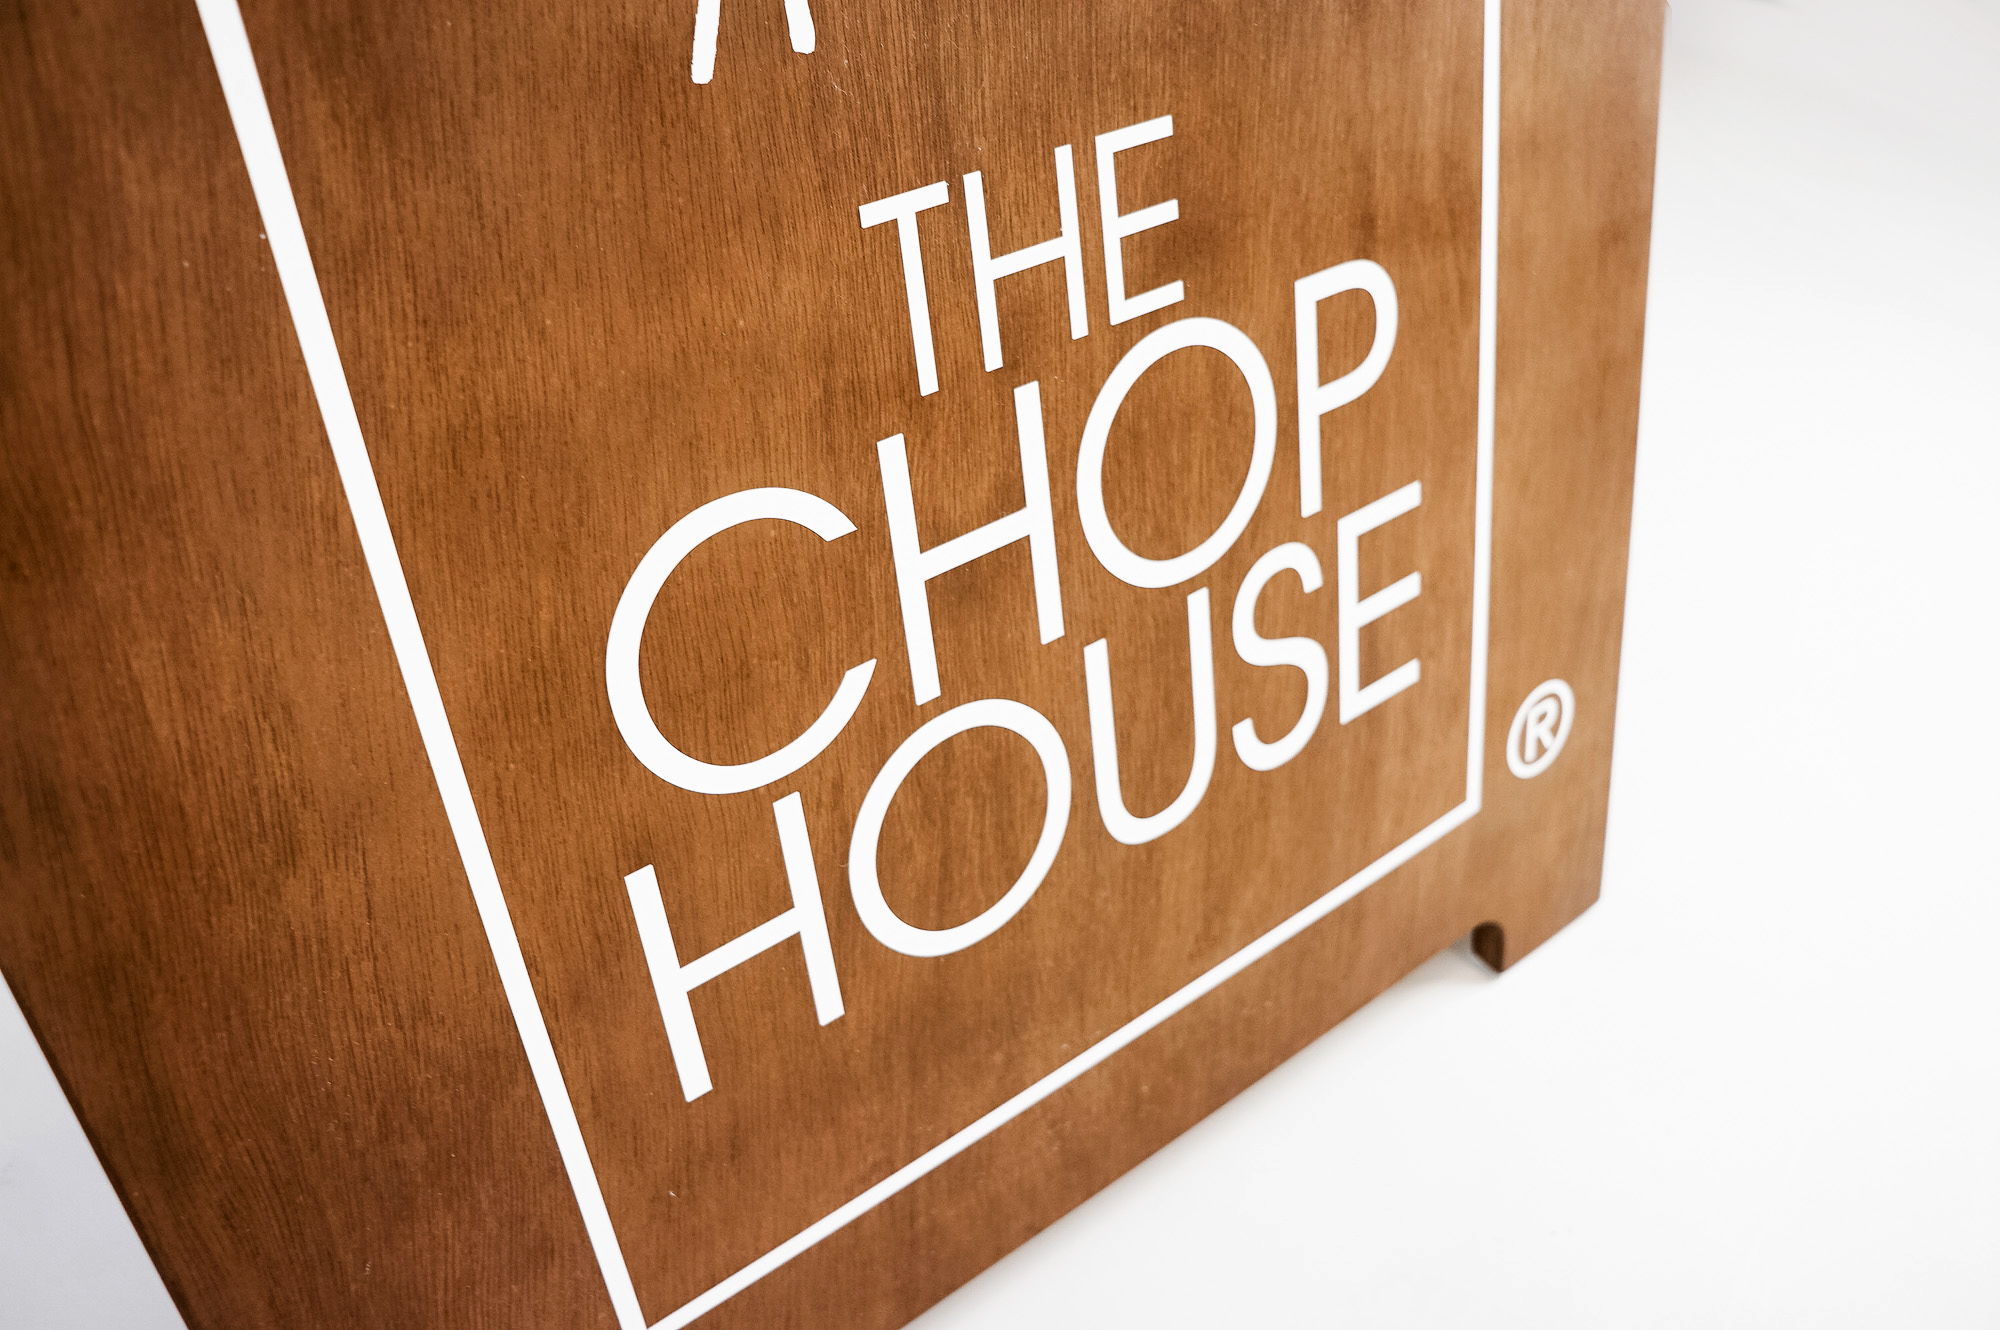 Dark wood sidewalk A-frame sign with white logo for The Chop House, a bar and lounge in Toledo, Ohio.